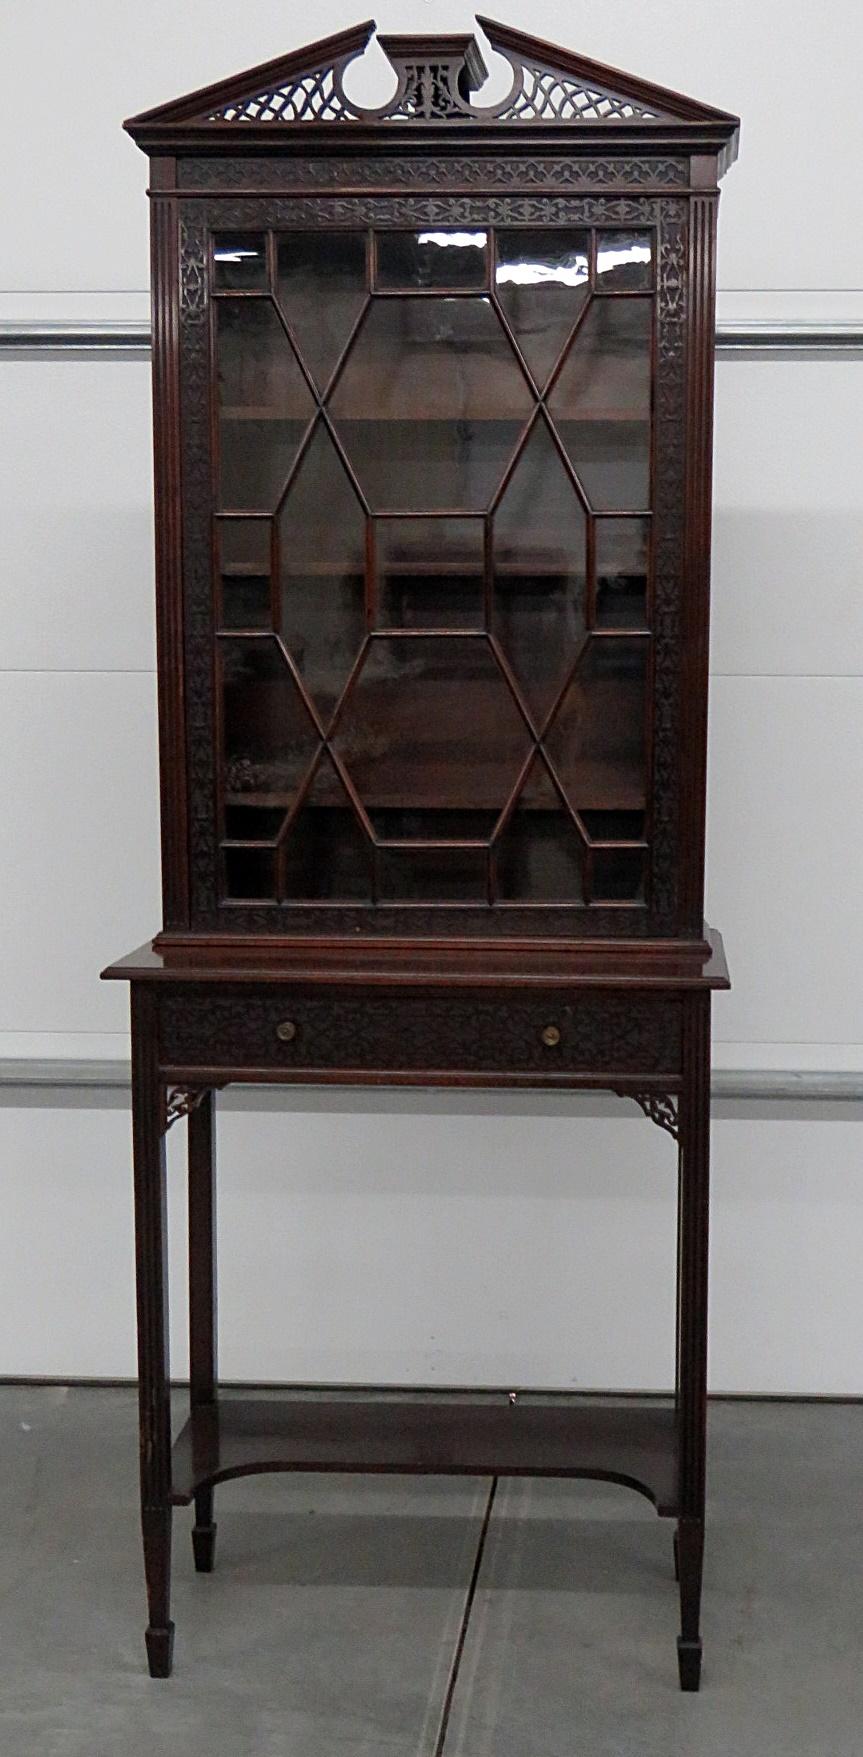 19th century Georgian collectors cabinet with one door containing 3 shelves over 1 drawer.